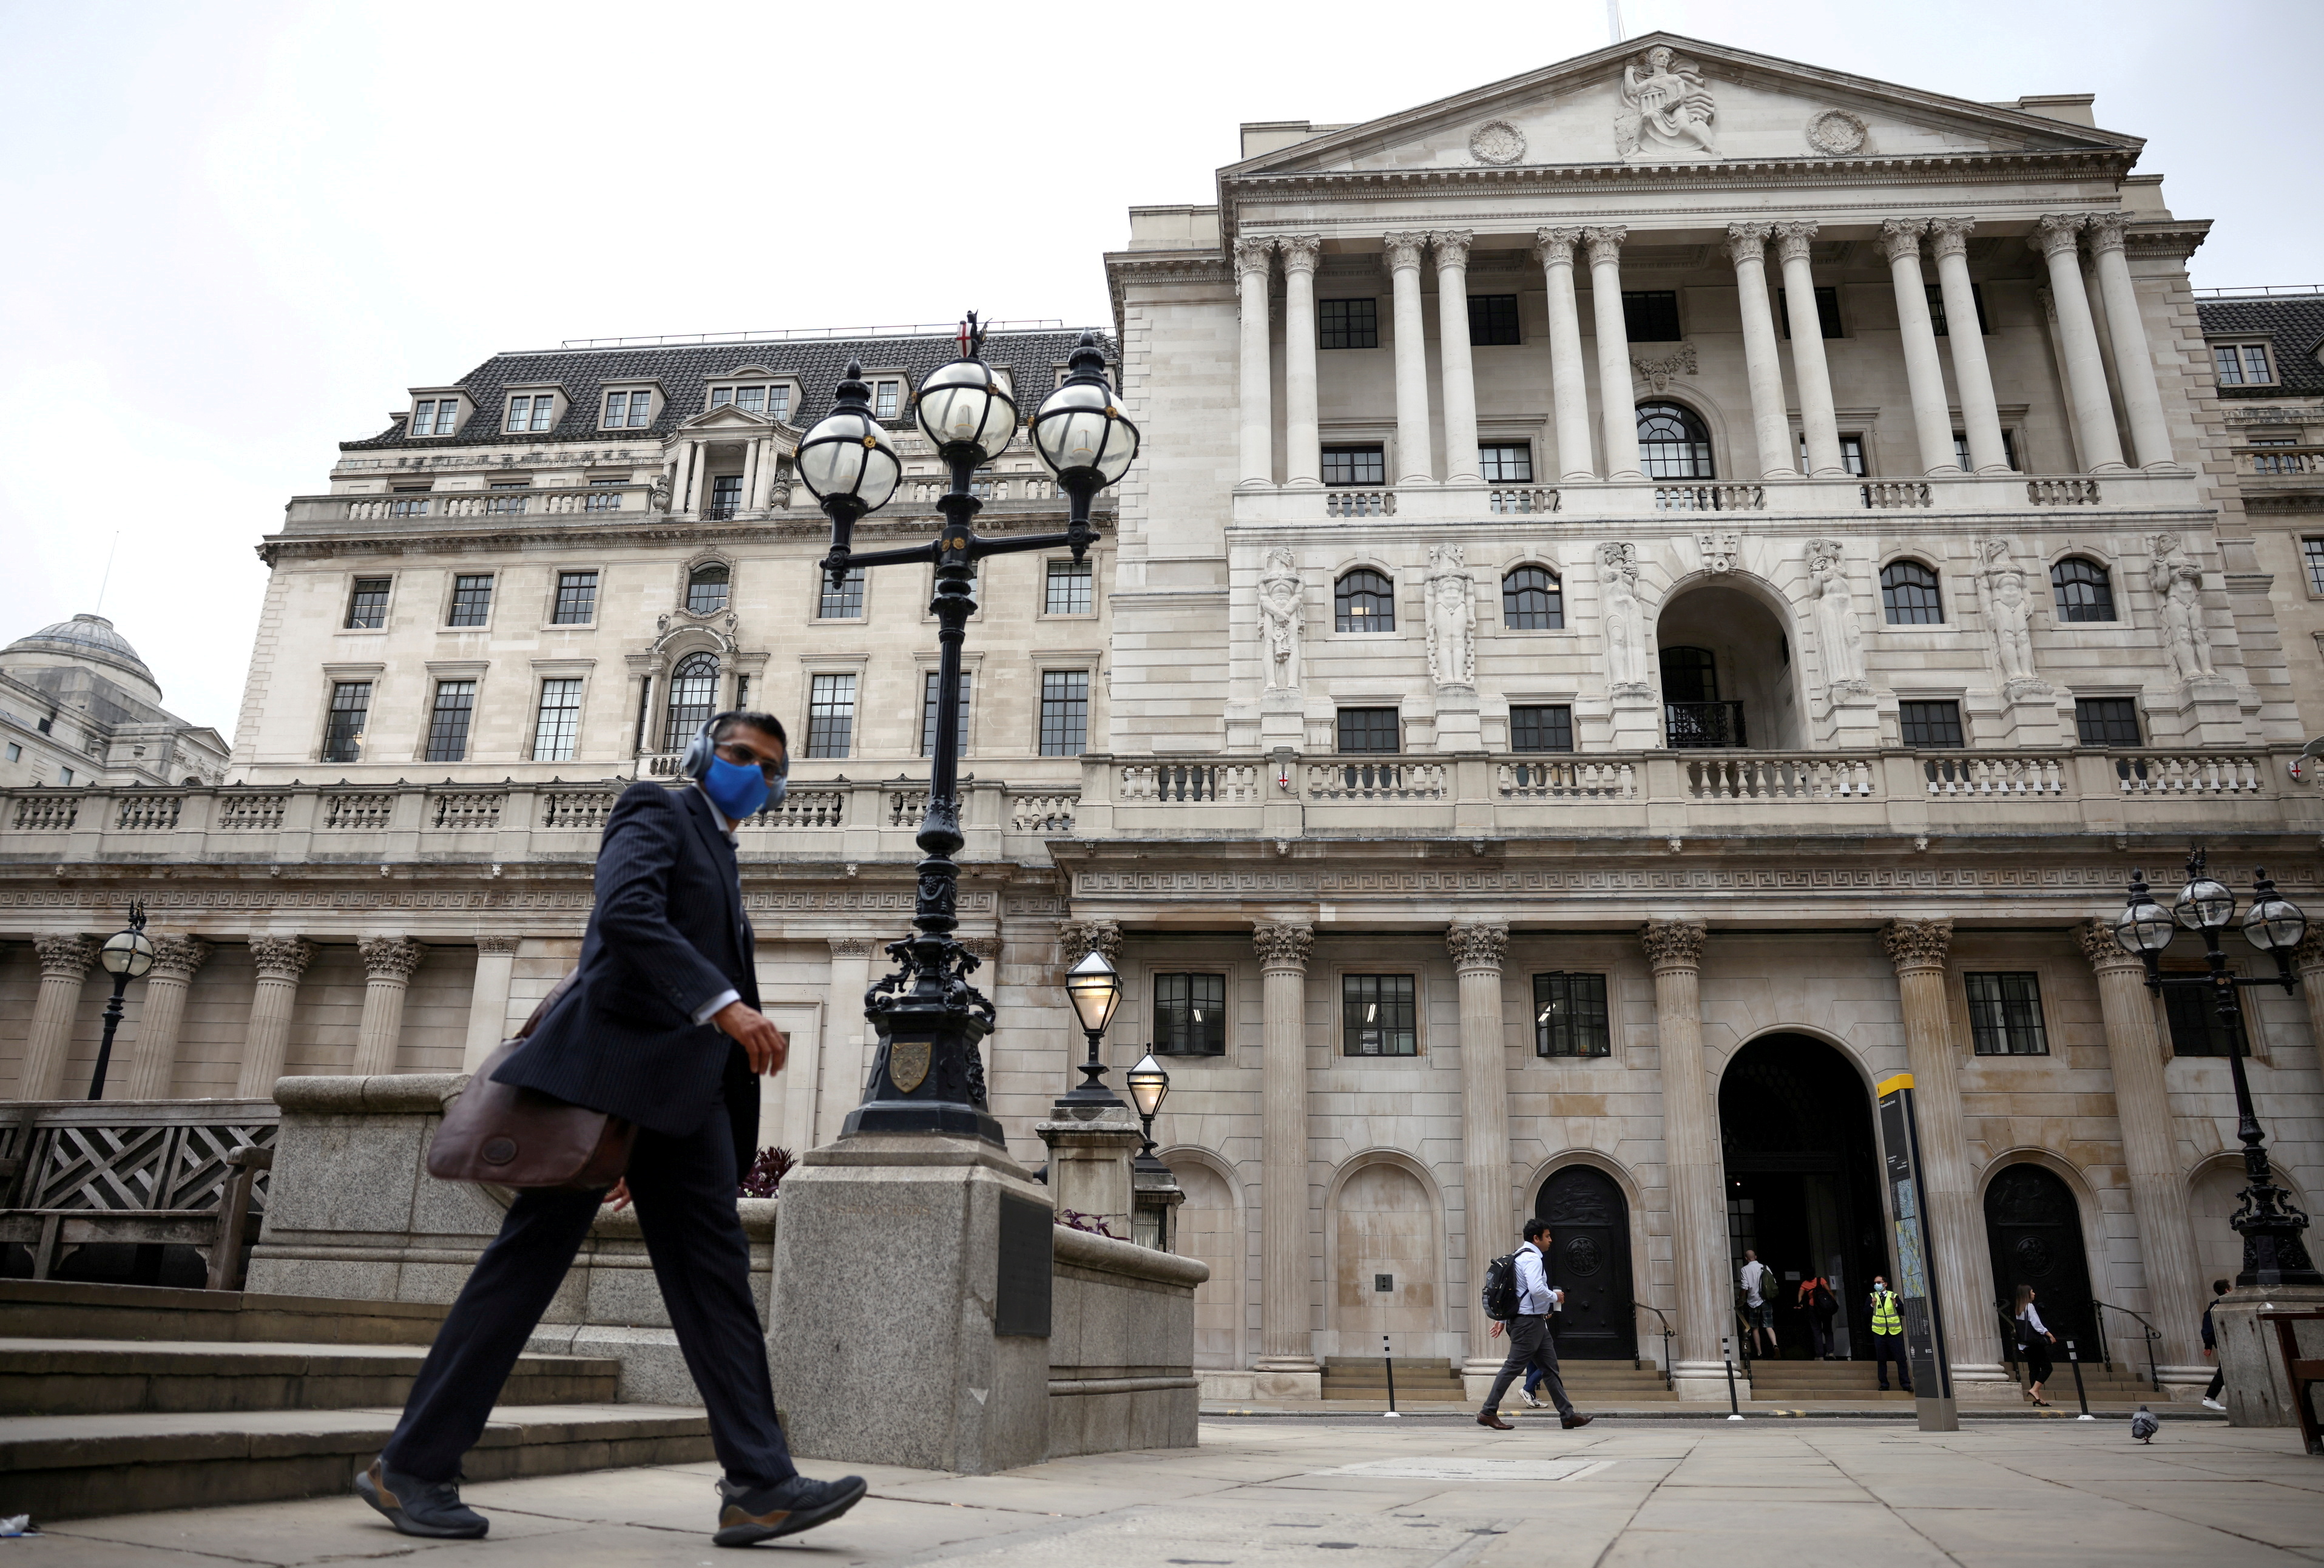 A person walks past the Bank of England in the City of London financial district, in London, Britain, June 11, 2021. REUTERS/Henry Nicholls/File Photo